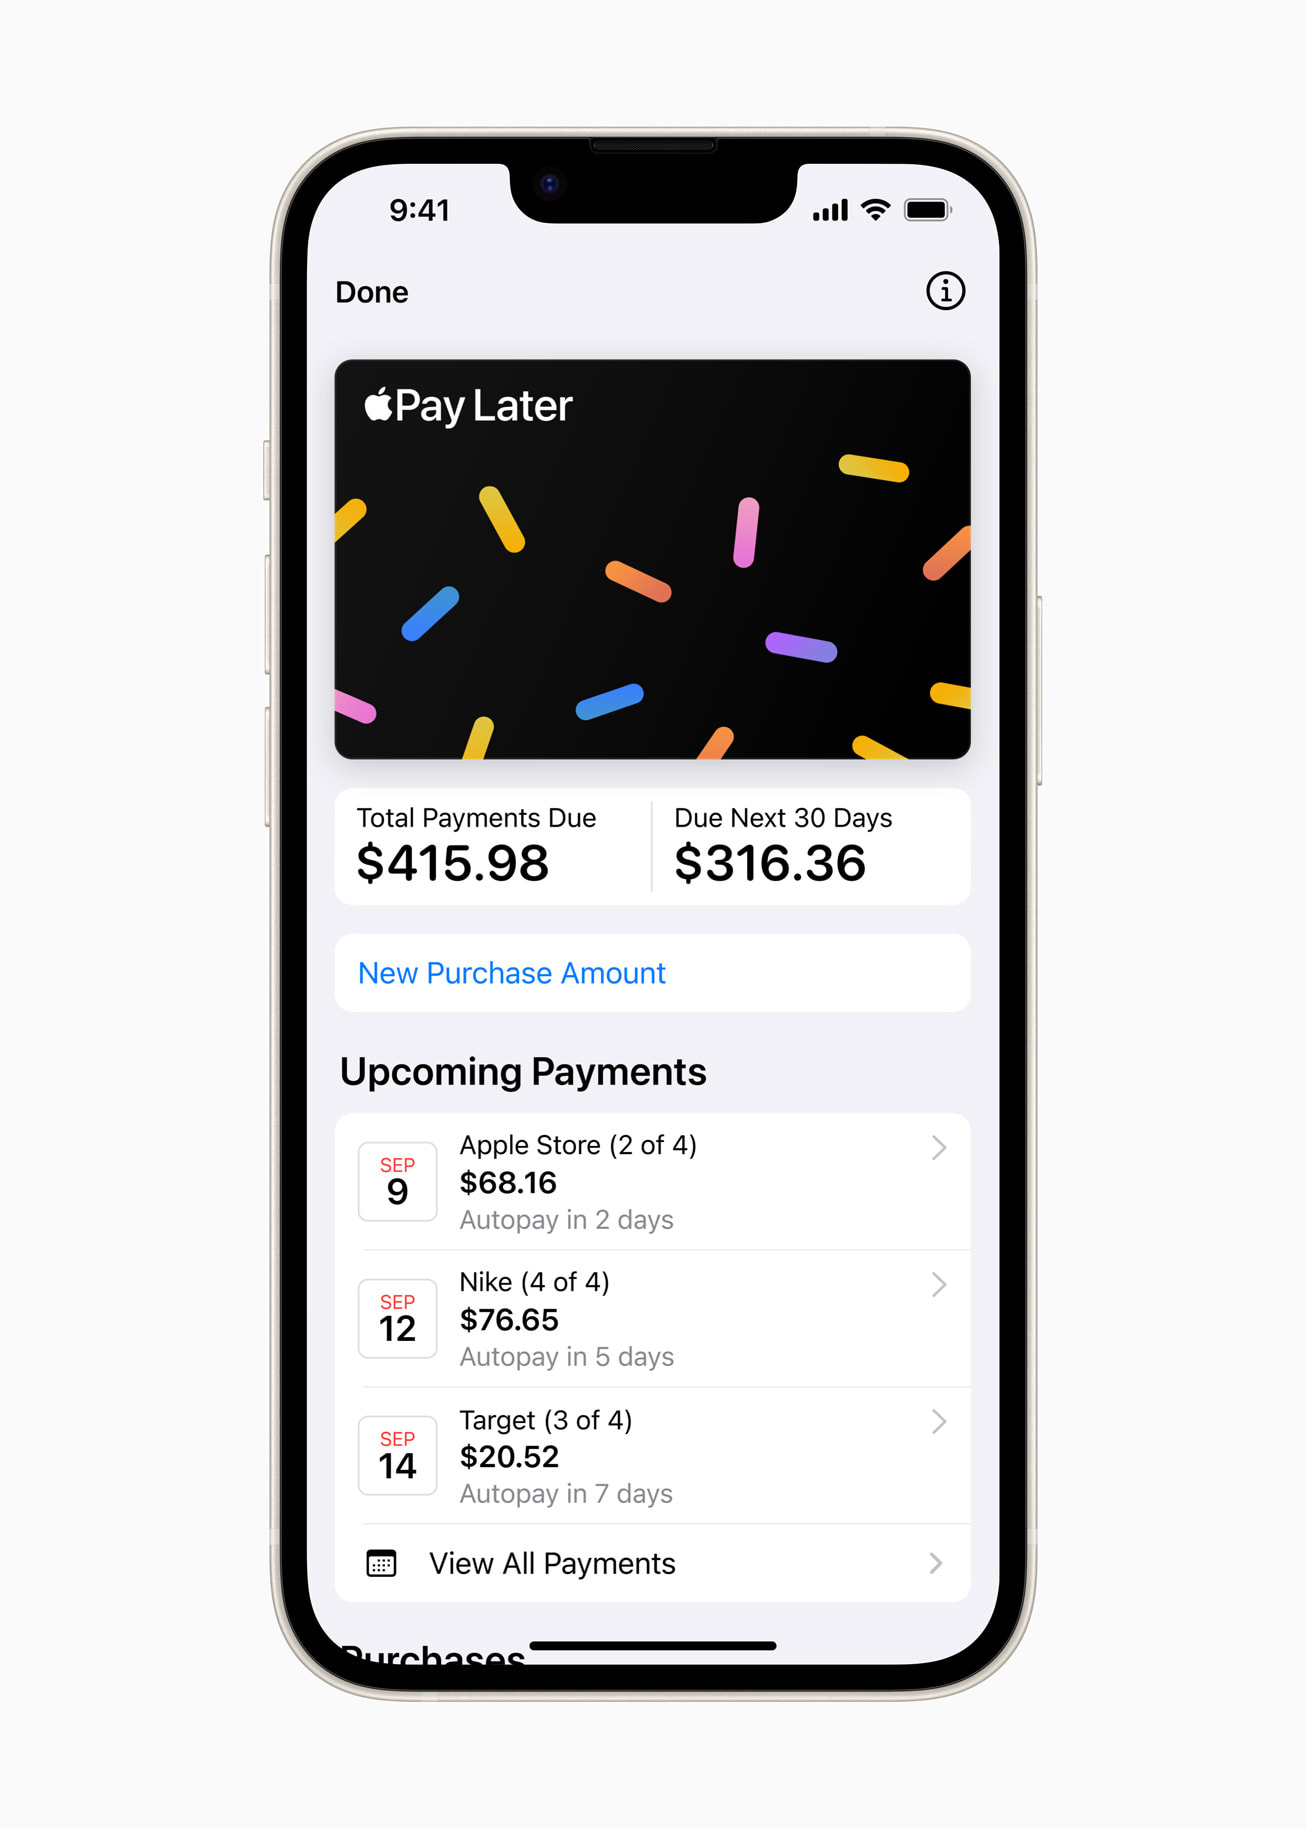 Apple pay later user interface with due and upcoming payments